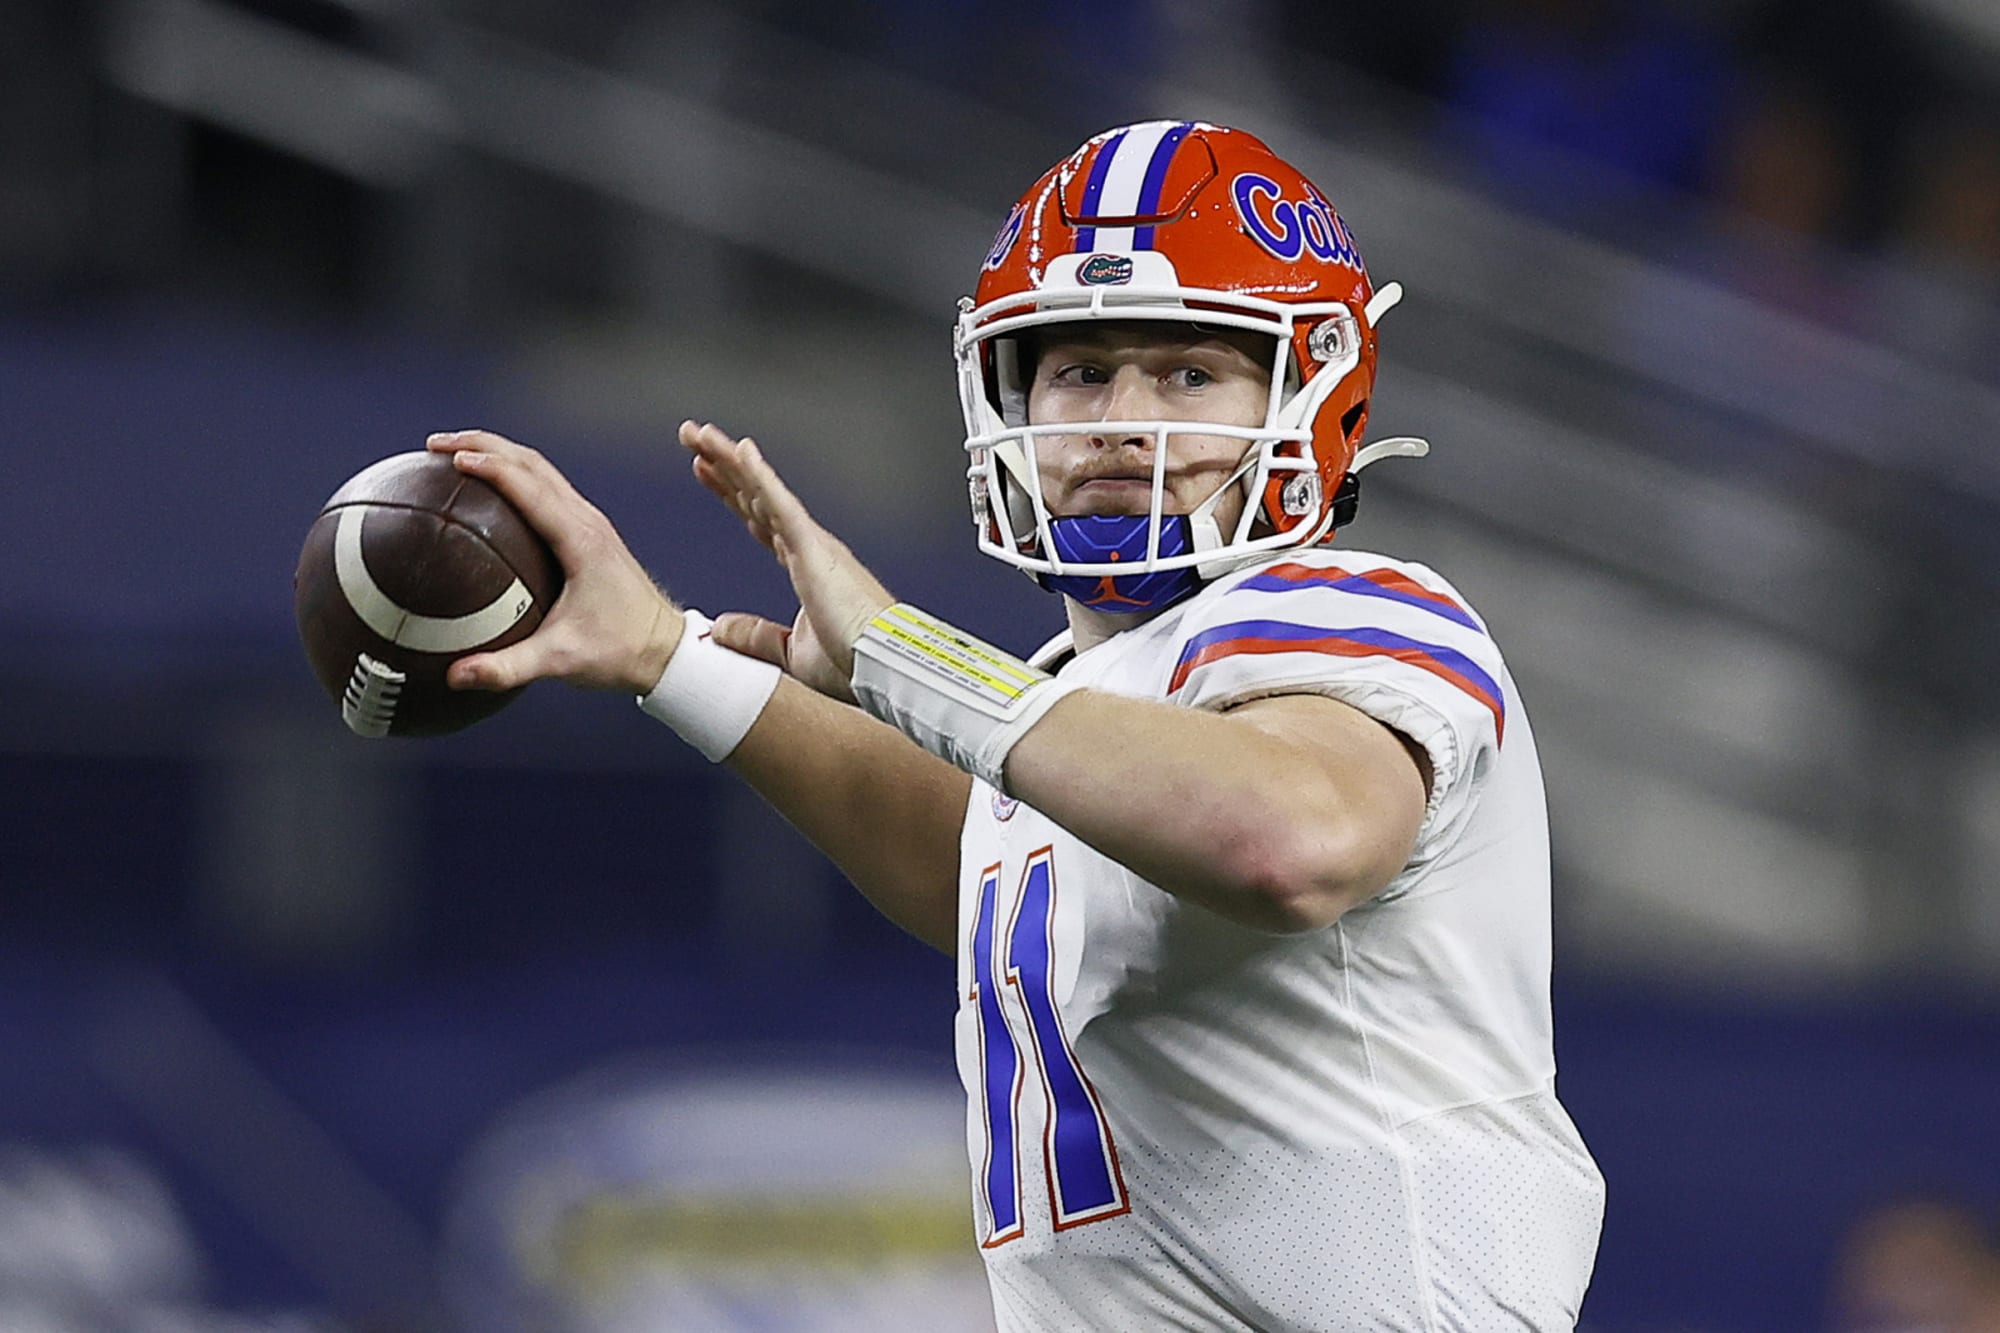 Florida Gators Will Kyle Trask be drafted in the 1st round?